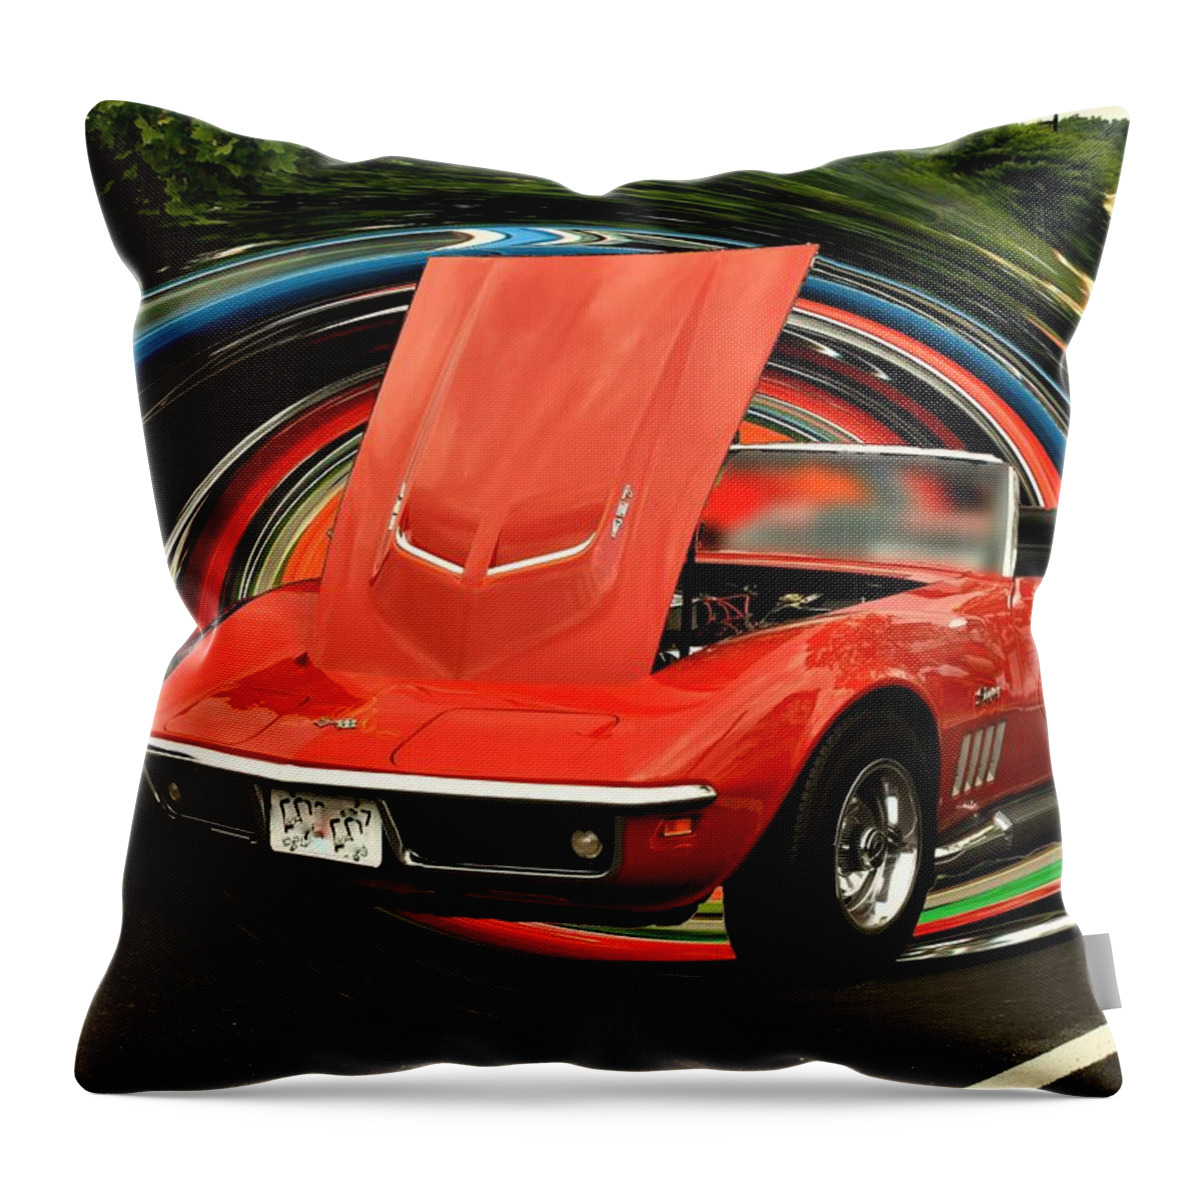  Chevy Throw Pillow featuring the photograph 1969 Chevrolet Stingray Corvette by M Three Photos